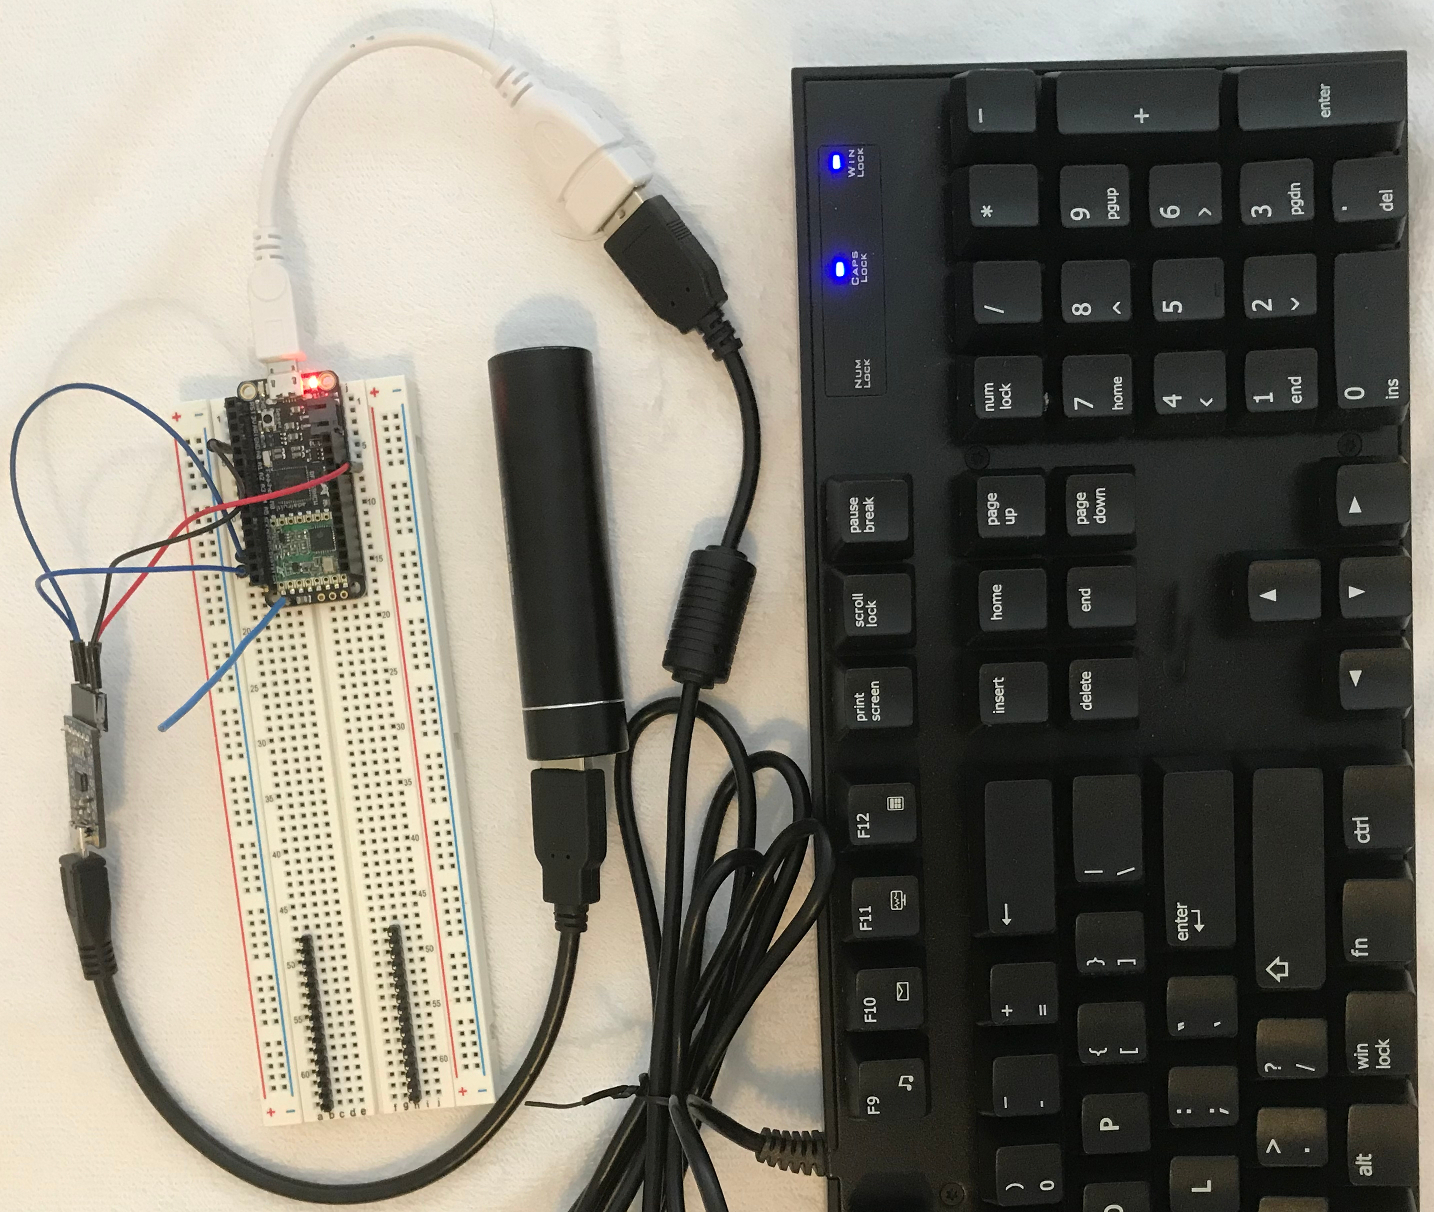 Feather M0 RFM69 and USB keyboard